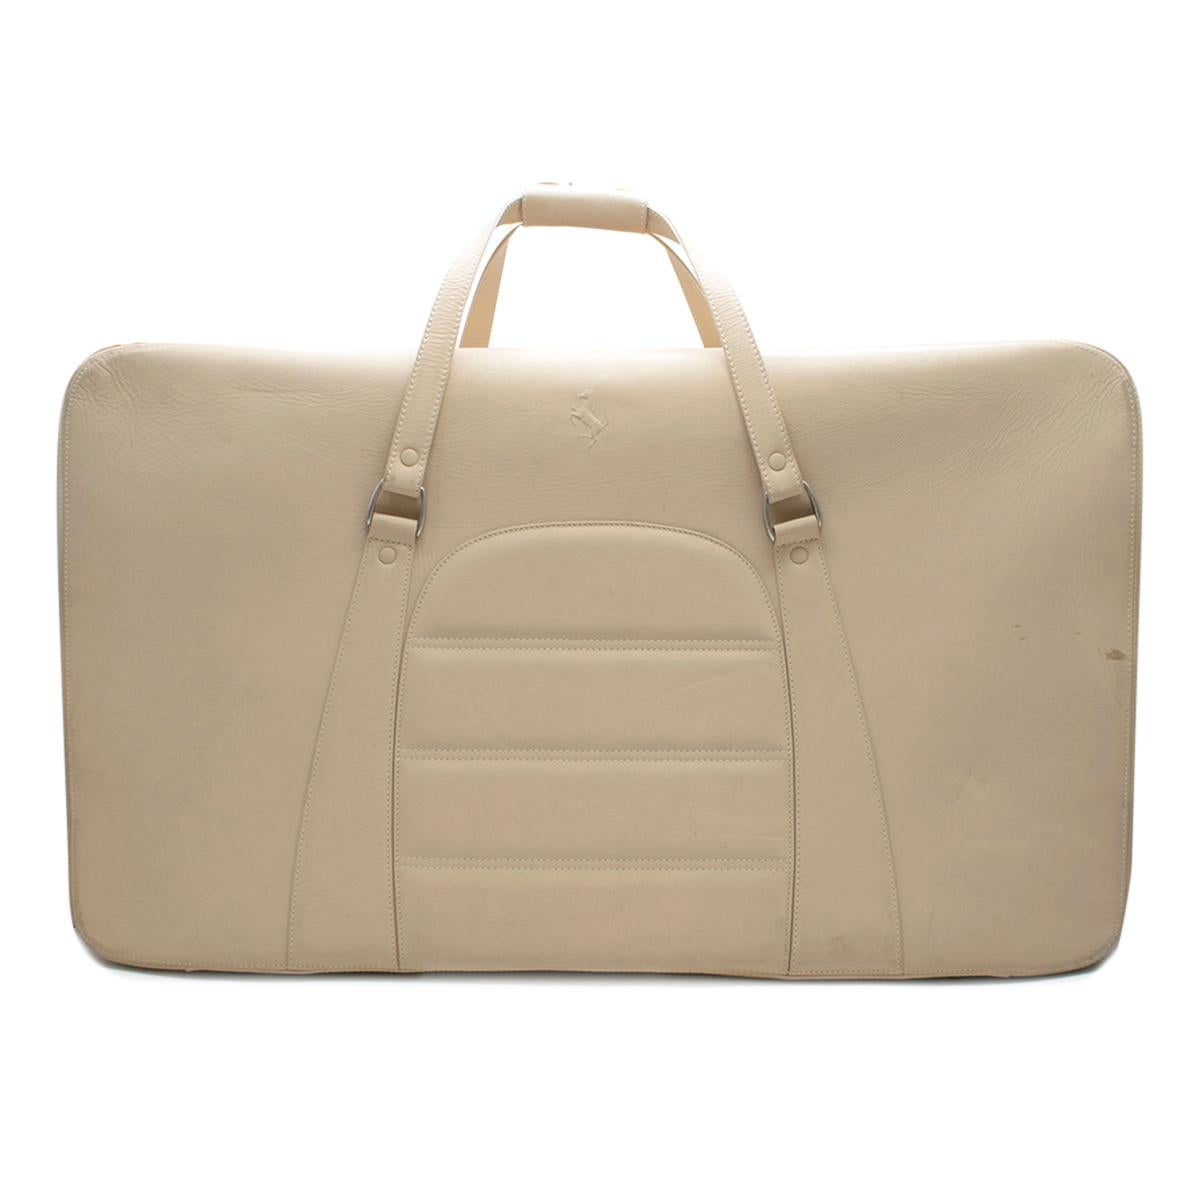 Ferrari Beige Large Leather Suitcase

Custom made Ferrari nude suitcase with a zip fastening. straps inside to hold the clothing in place and protective studs on the bottom. 

Please note, these items are pre-owned and may show signs of being stored